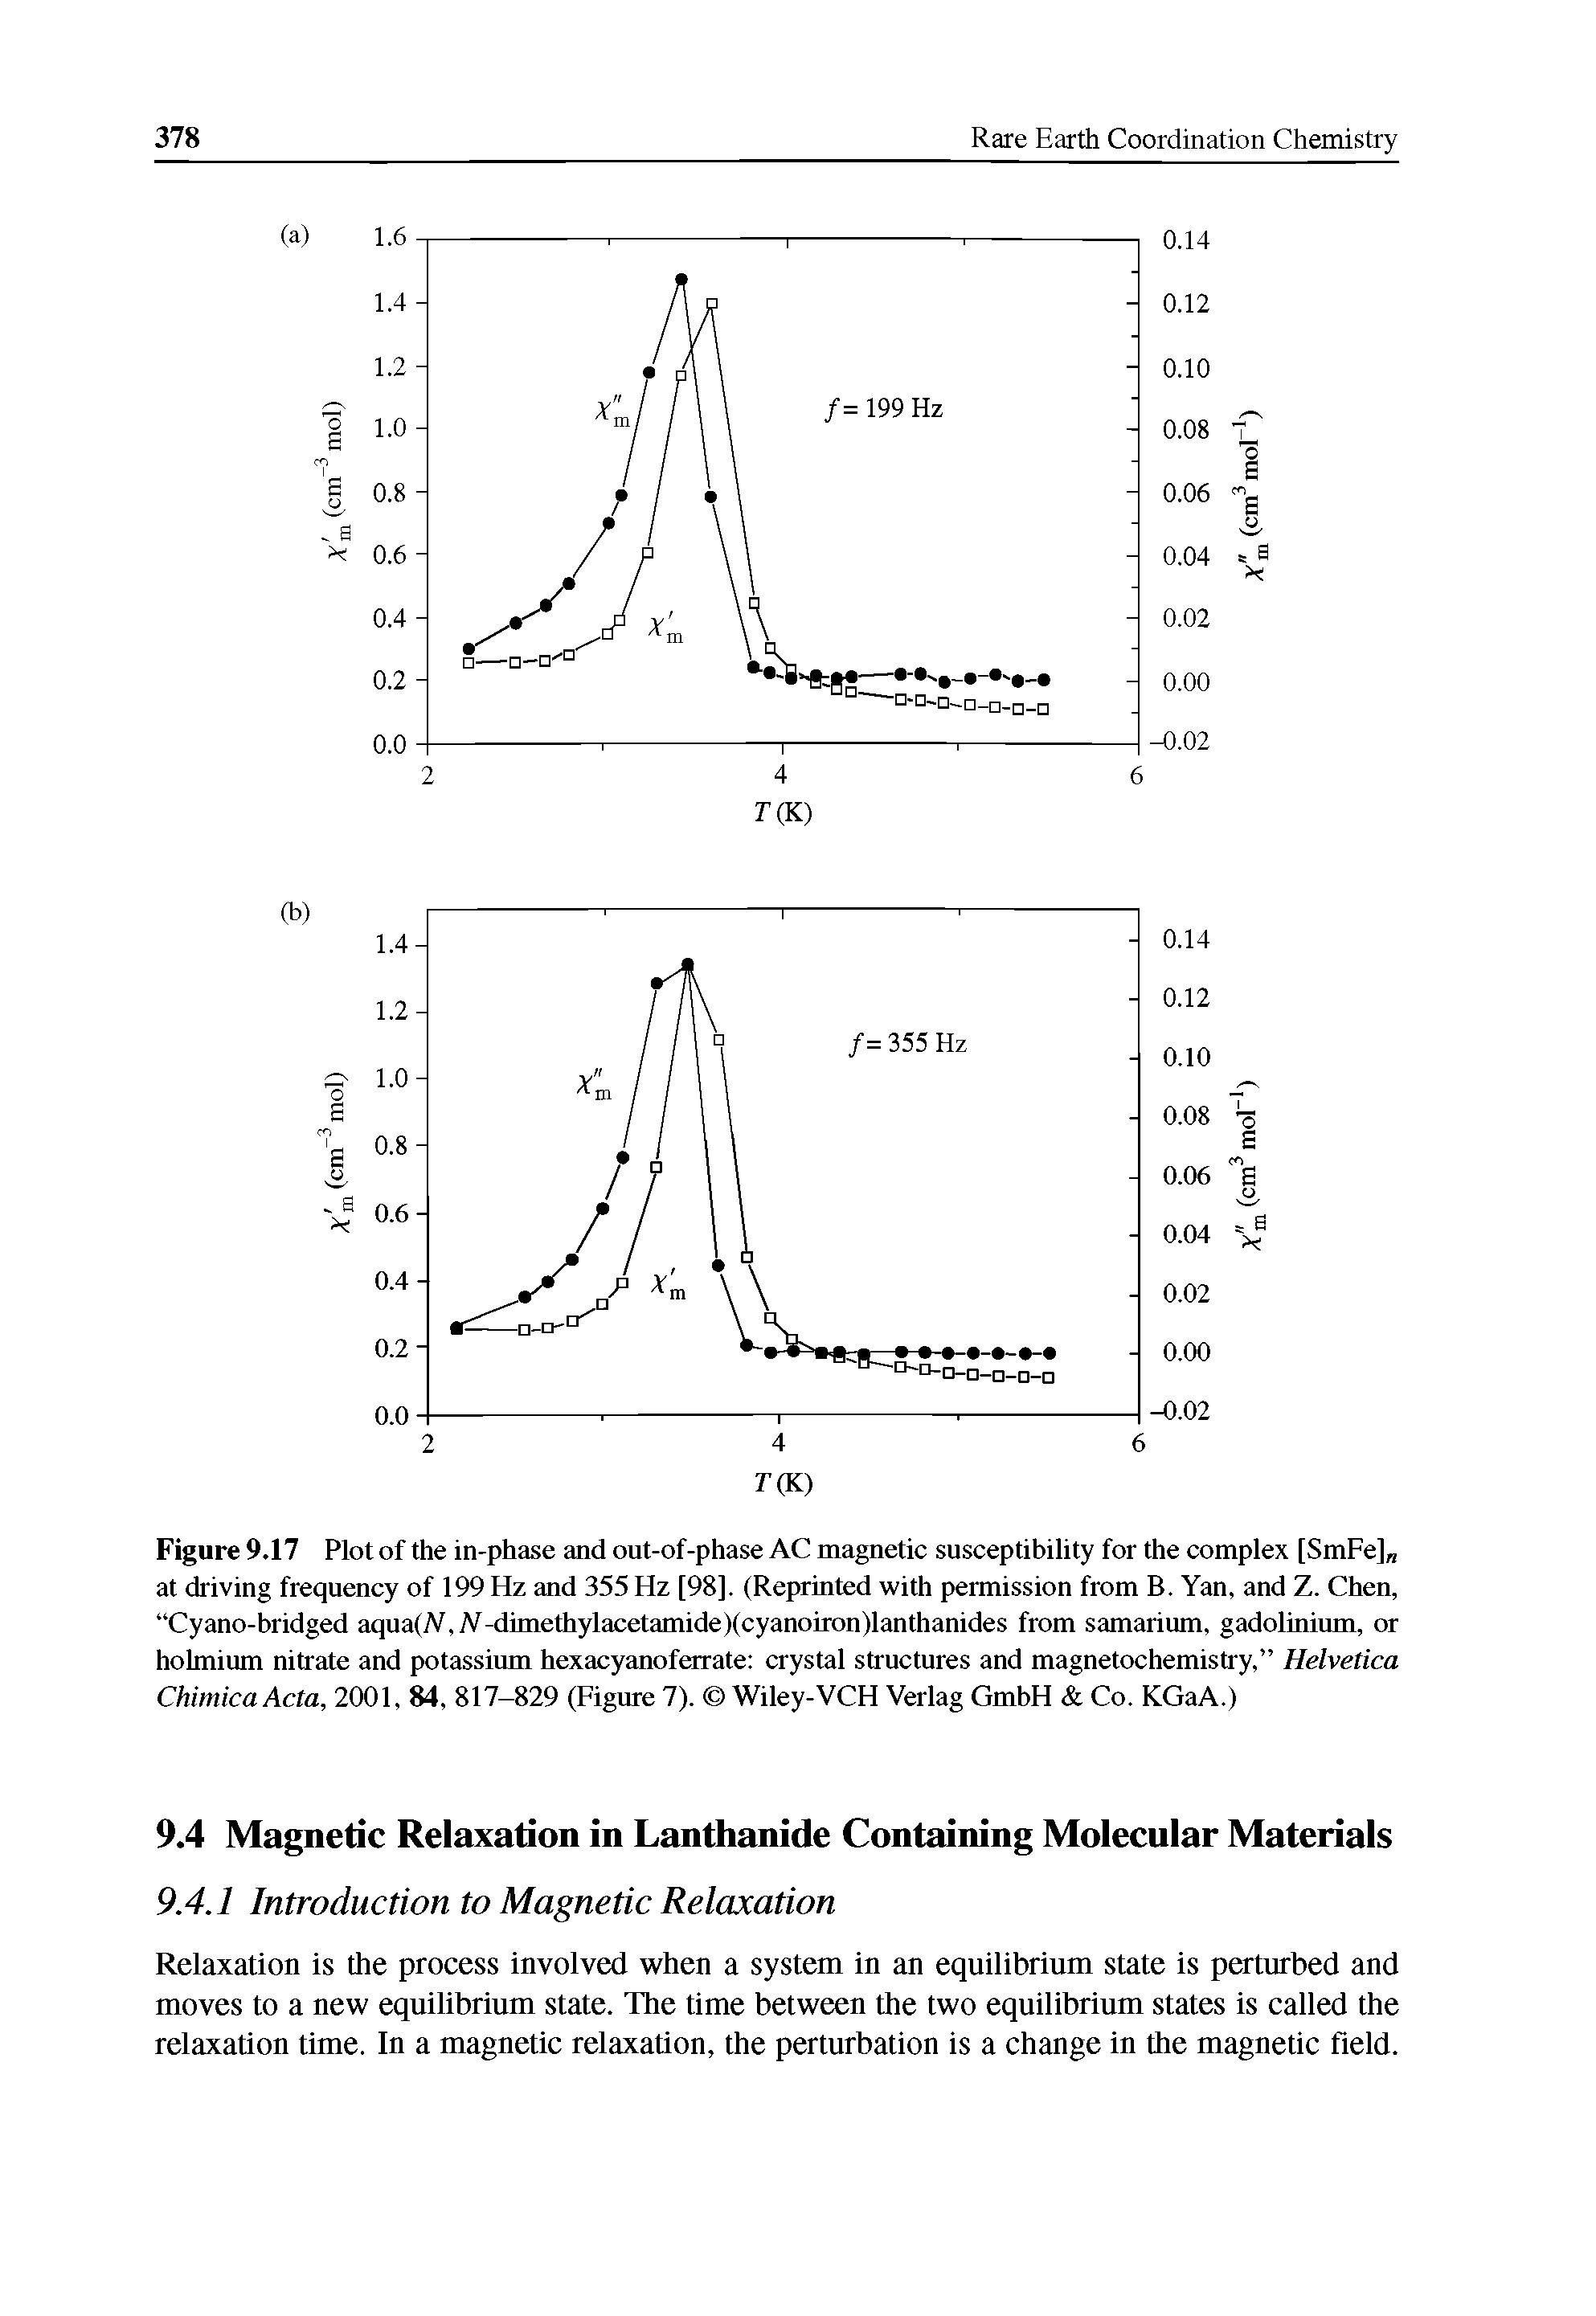 Figure 9.17 Plot of the in-phase and out-of-phase AC magnetic susceptibility for the complex [SmFe] at driving frequency of 199 Hz and 355 Hz [98]. (Reprinted with permission from B. Yan, and Z. Chen, Cyano-bridged aqua(A, Al-dimethylacetamide)(cyanoiron)lanthanides from samarium, gadolinium, or holmium nitrate and potassium hexacyanoferrate crystal structures and magnetochemistry, Helvetica Chimica Acta, 2001, 84, 817-829 (Figure 7). Wiley-VCH Verlag GmbH Co. KGaA.)...